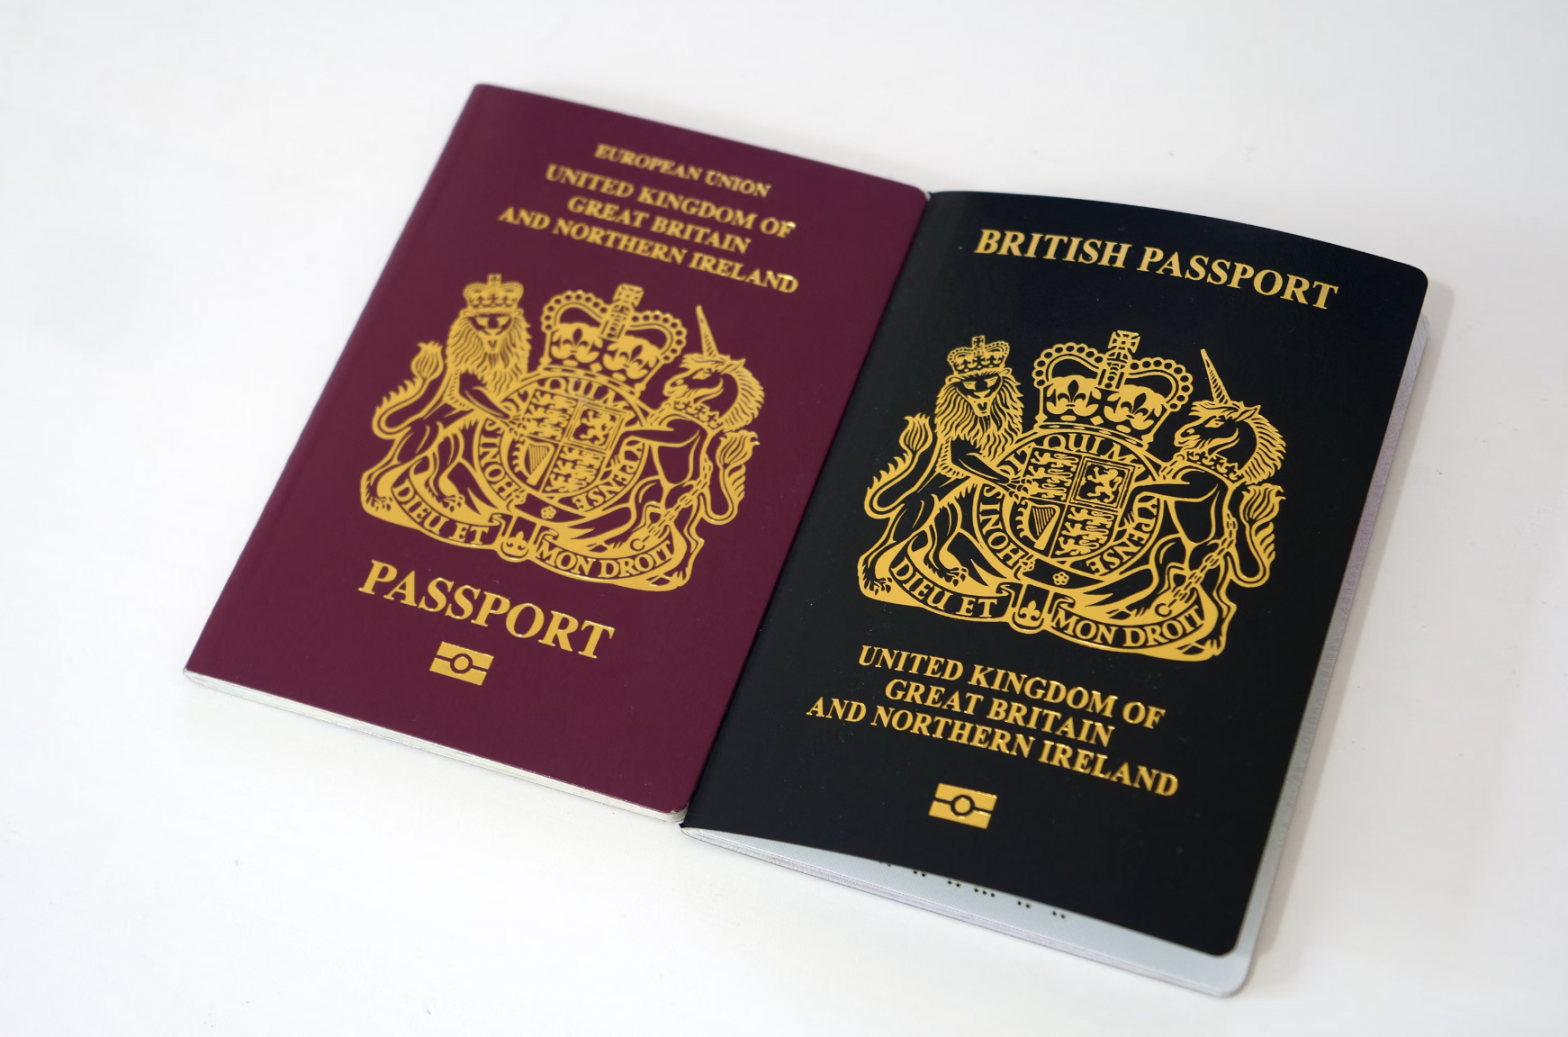 new passport fees-uk passport application fees to rise in April-uk passport image for Lisa's Law blogs